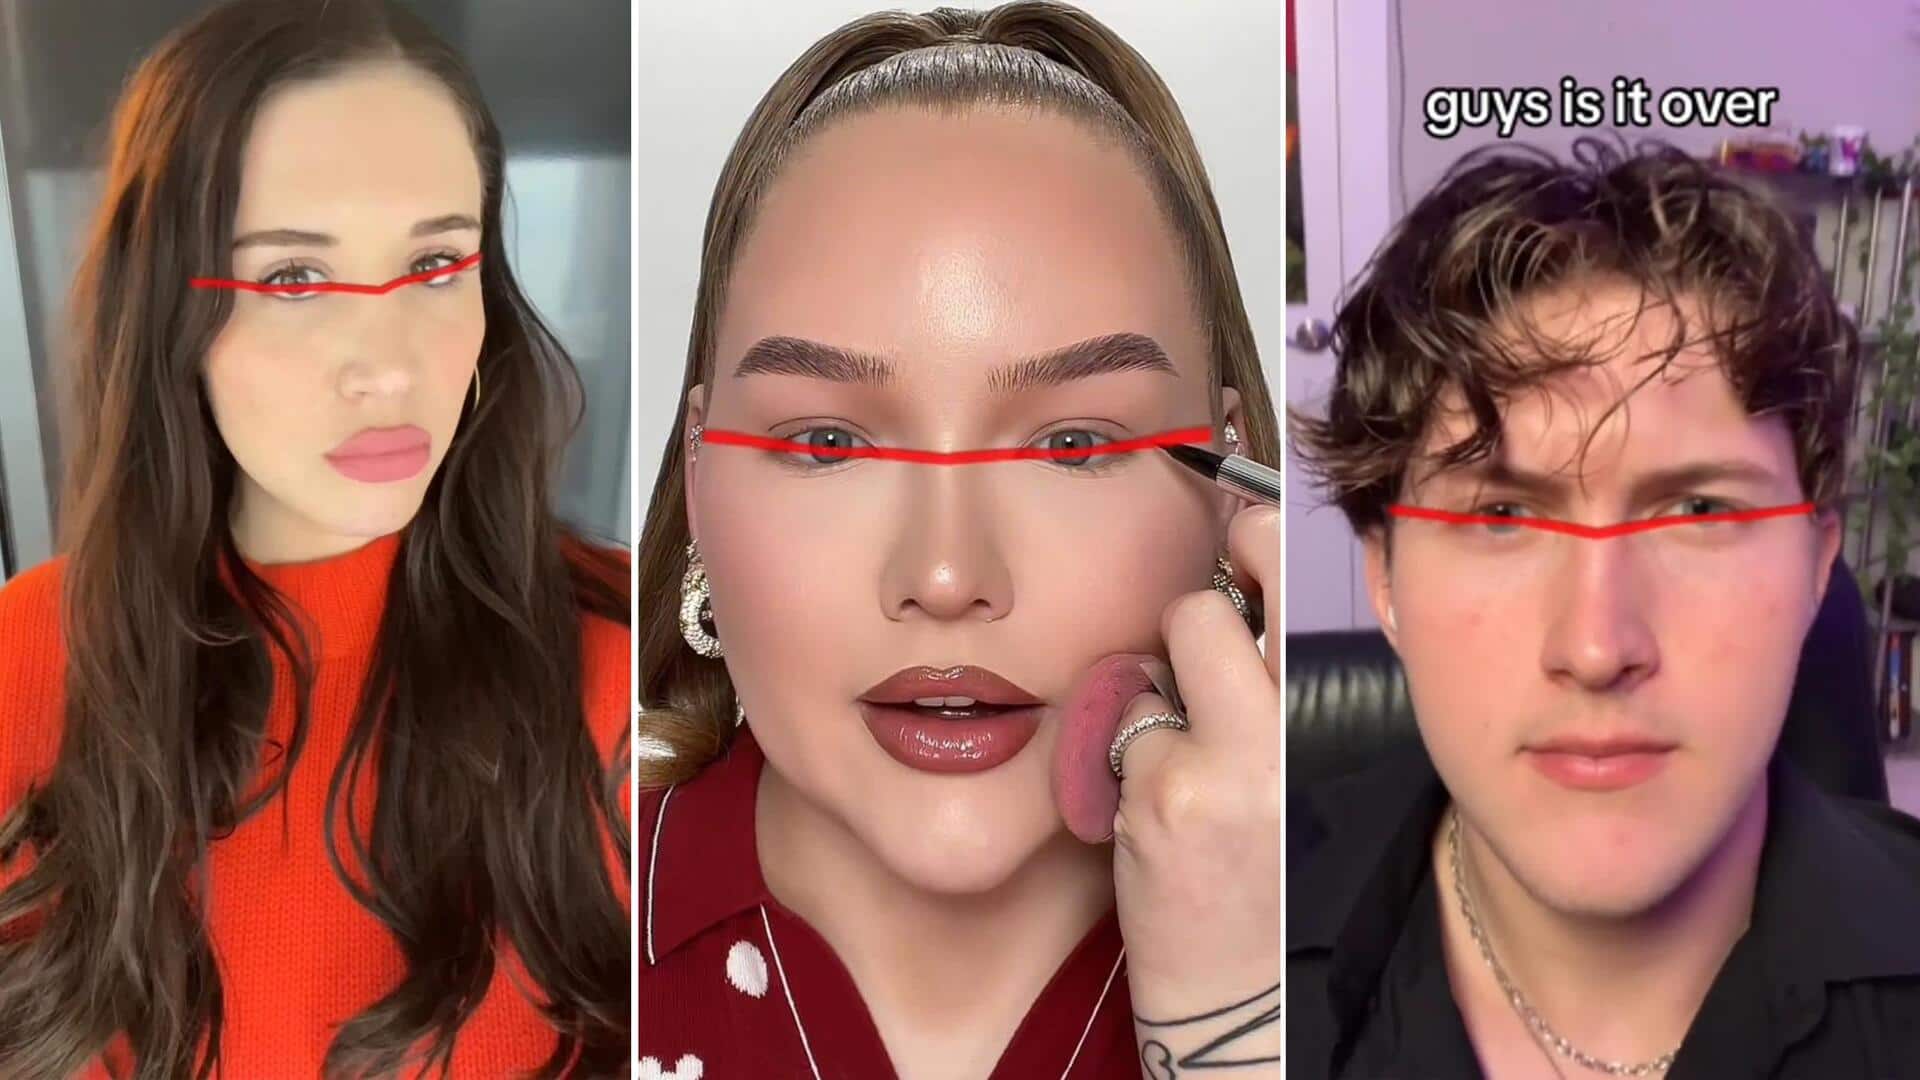 Canthal tilt: TikTok's latest obsession with eye angle